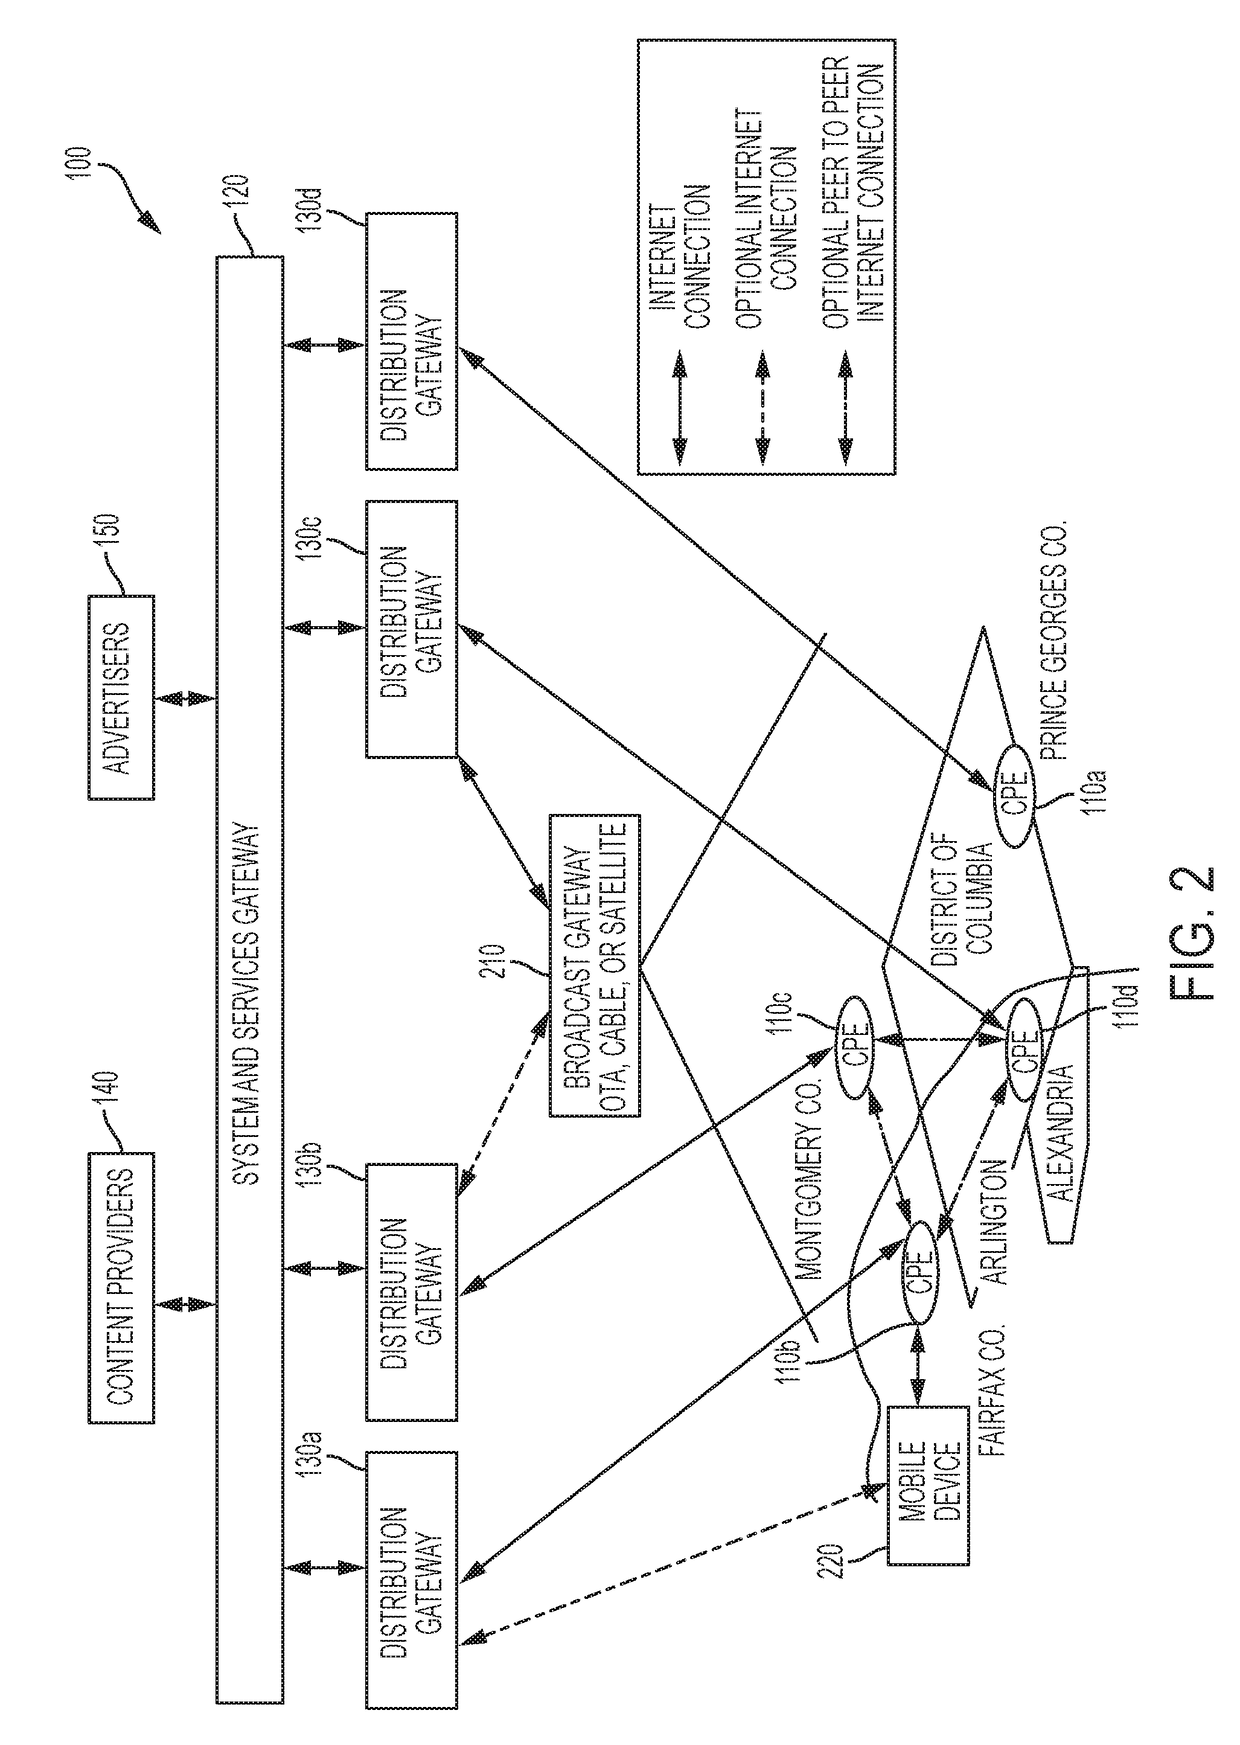 Clustering and adjudication to determine a recommendation of multimedia content